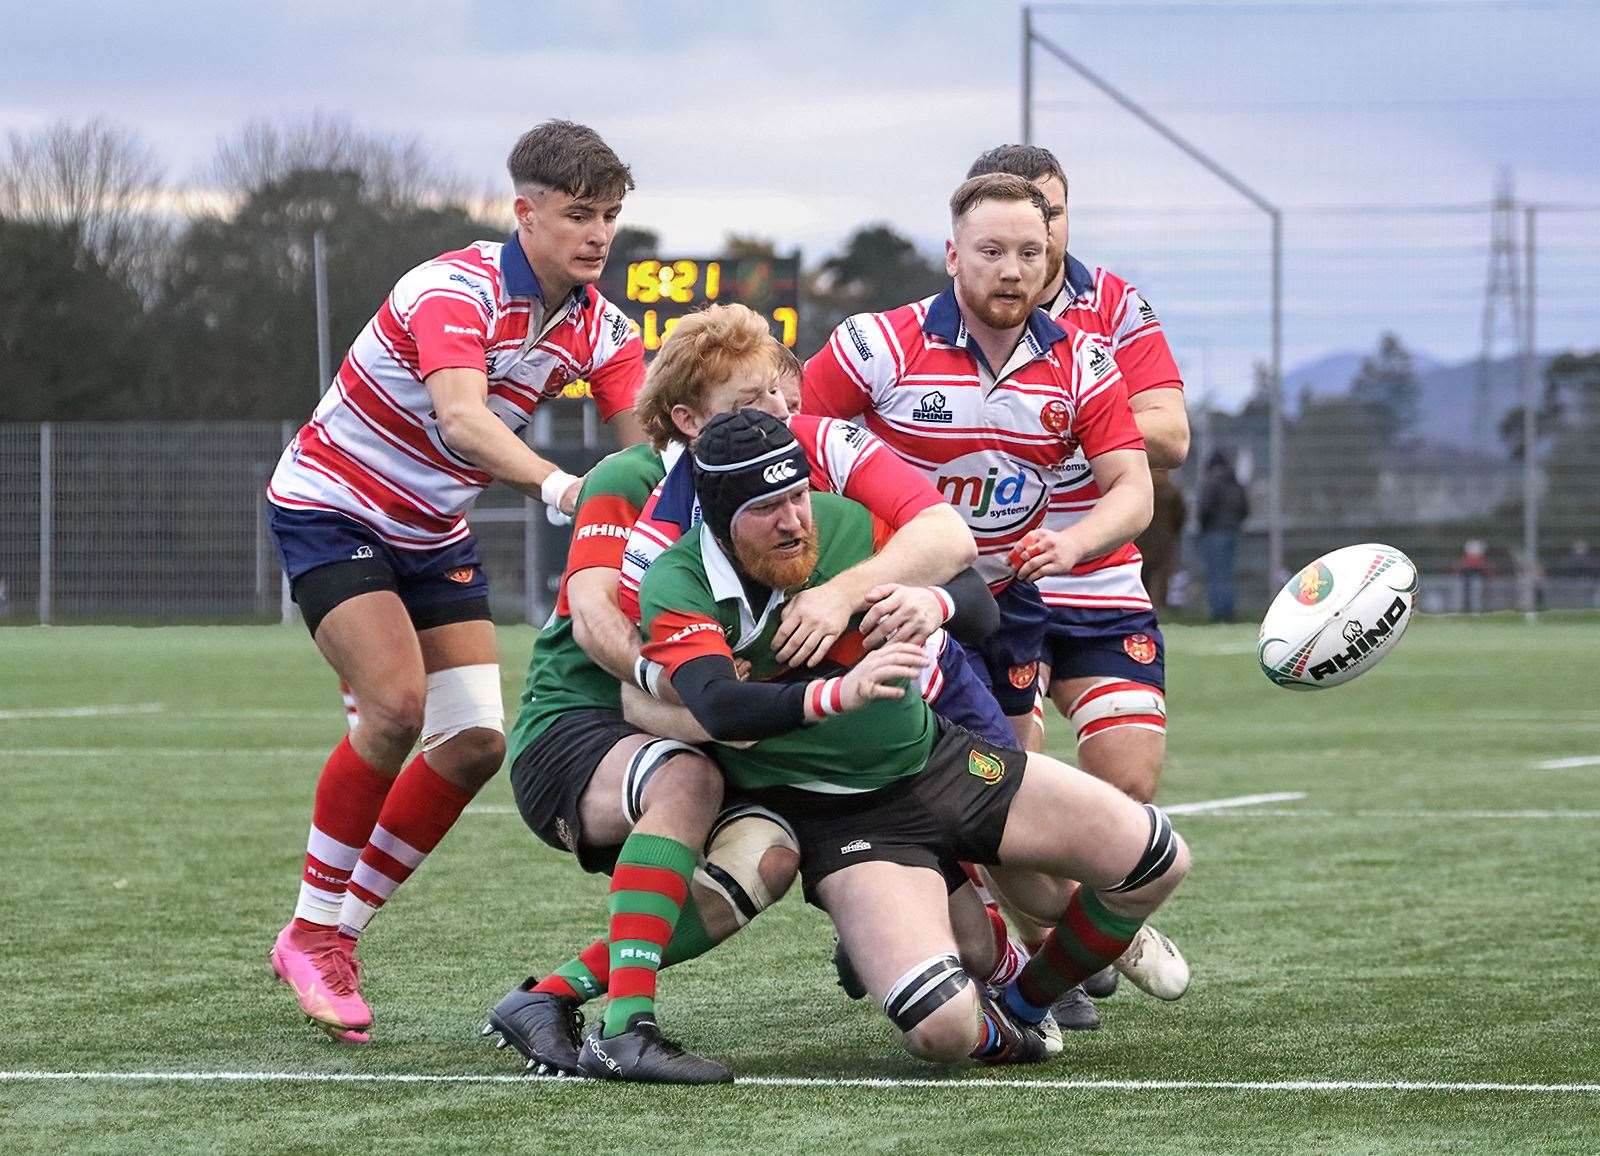 Ewan Simpson tackles. Rory Millar and Kris Morrison in support. Picture: John MacGregor